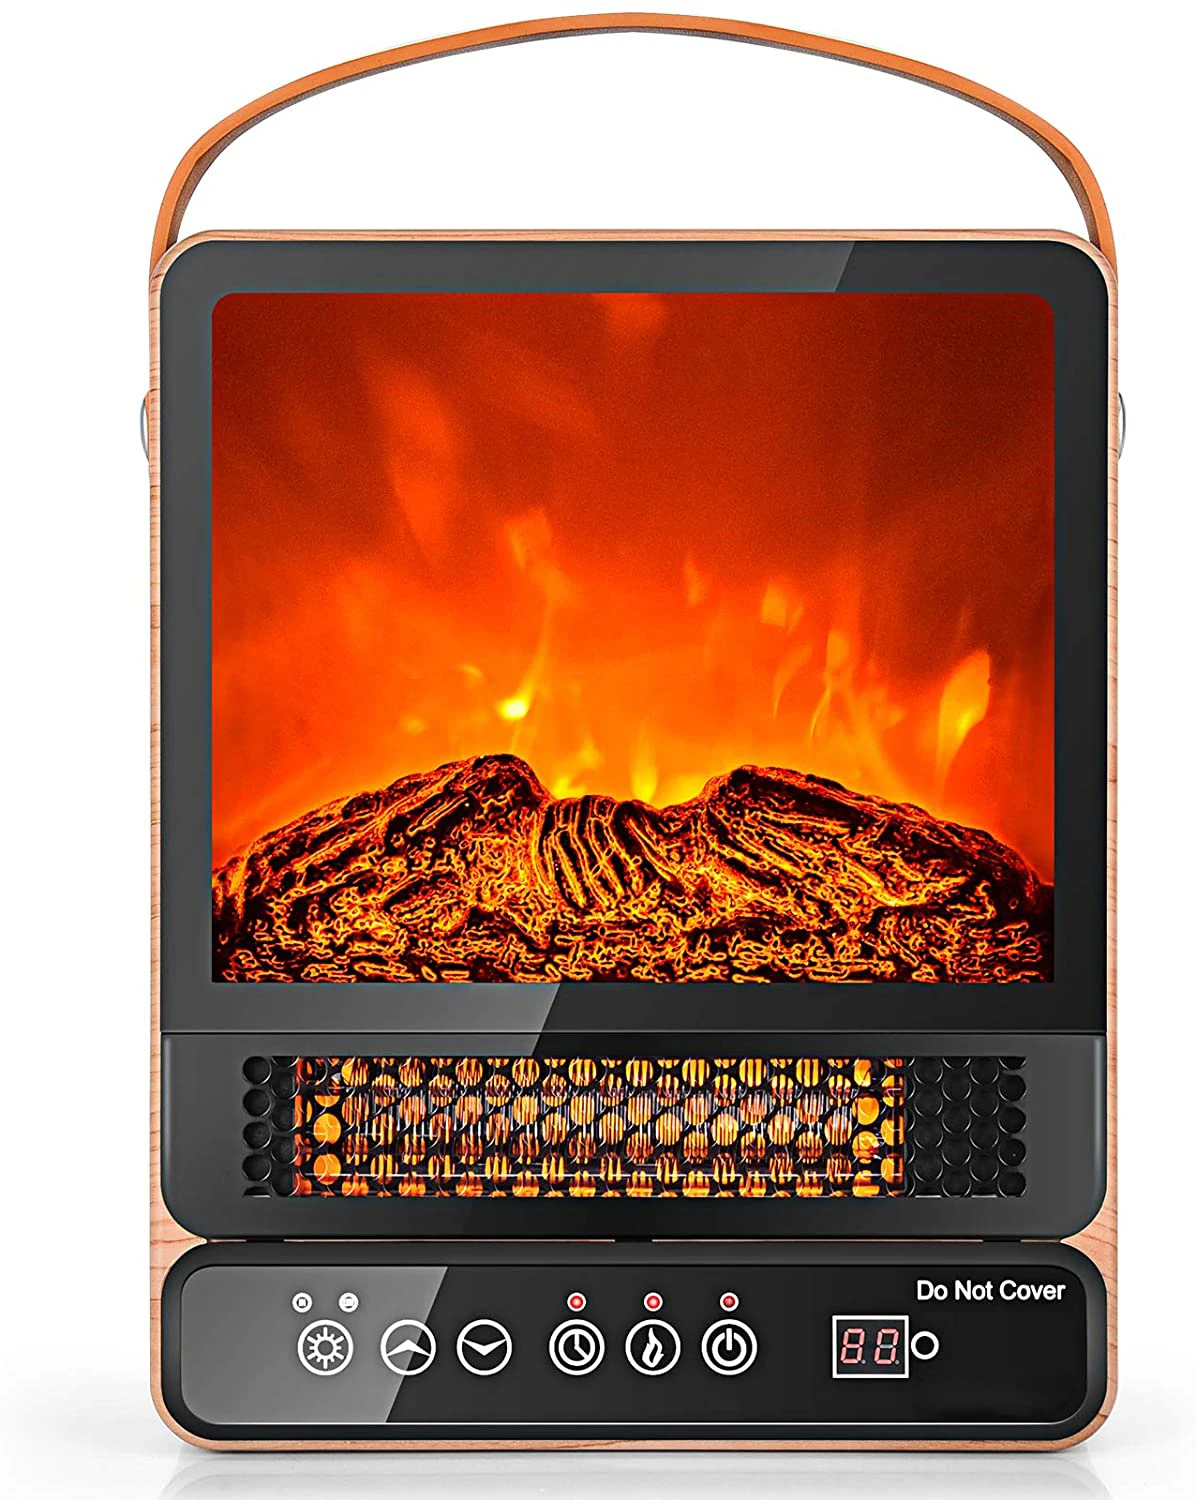 Portable LED 1500W Overheat Wire Thermostat control Heater fireplace with Power indicator light